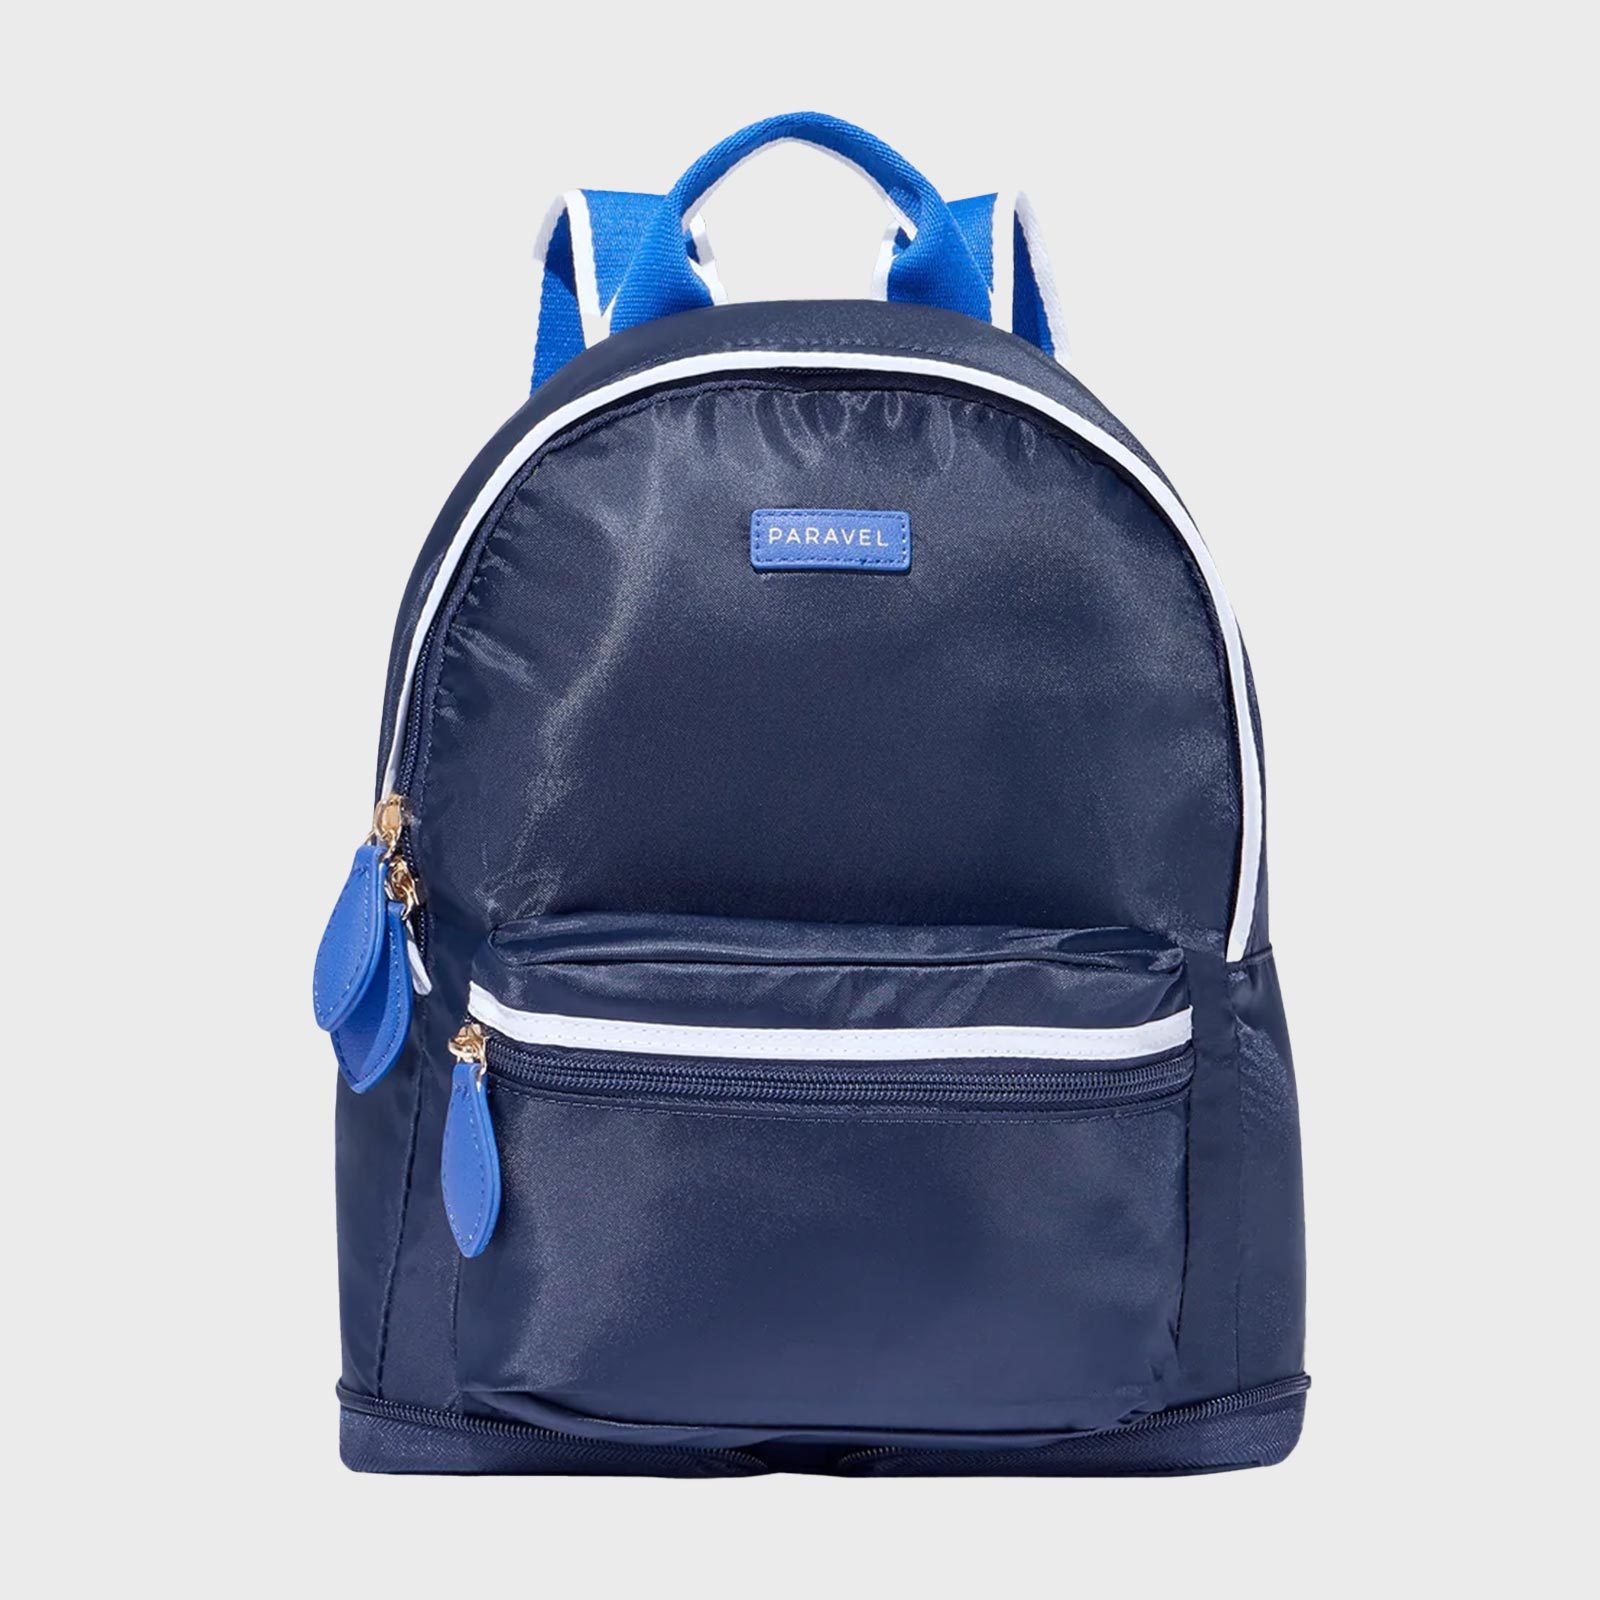 Paravel Backpack  front view